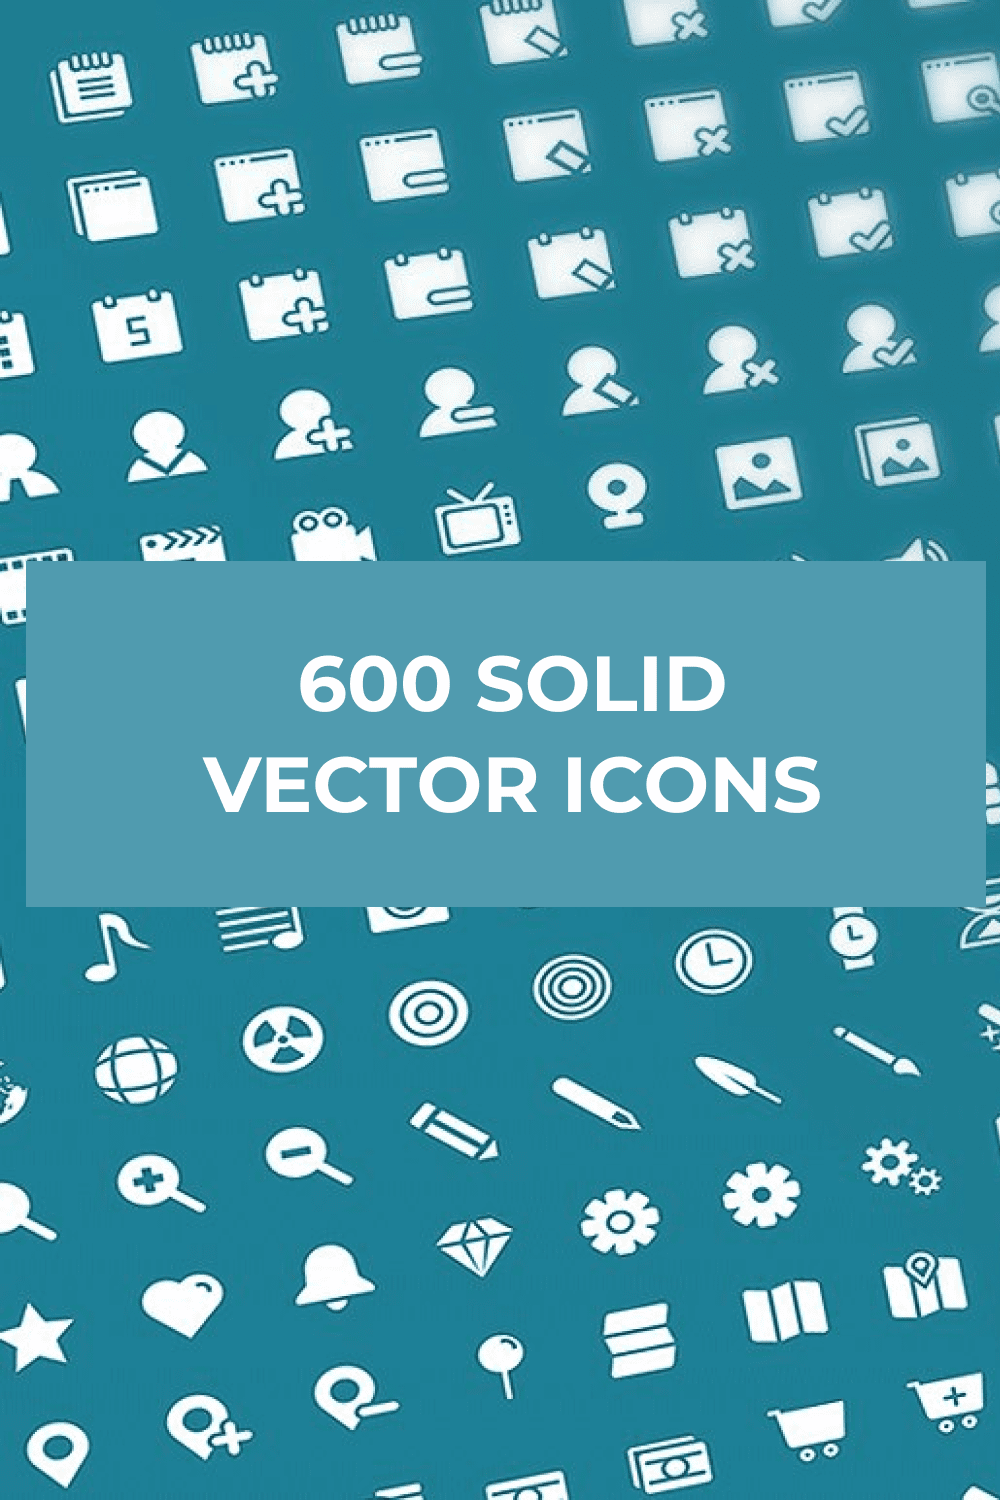 600 Solid Vector Icons Pinterest.